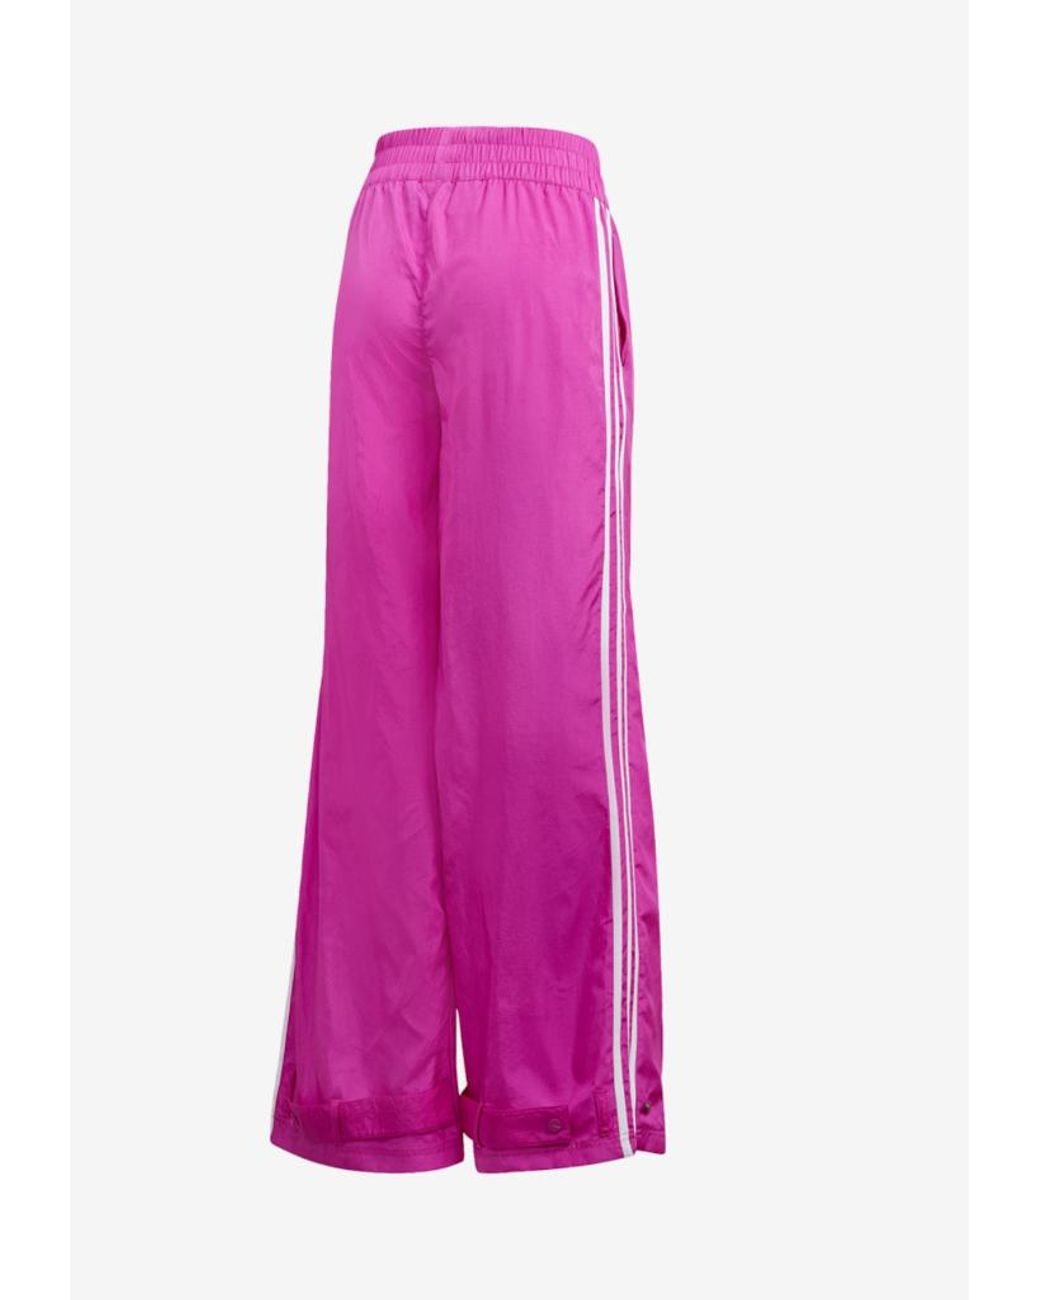 adidas Originals Synthetic Bellista Track Pants In Nylon in Pink | Lyst